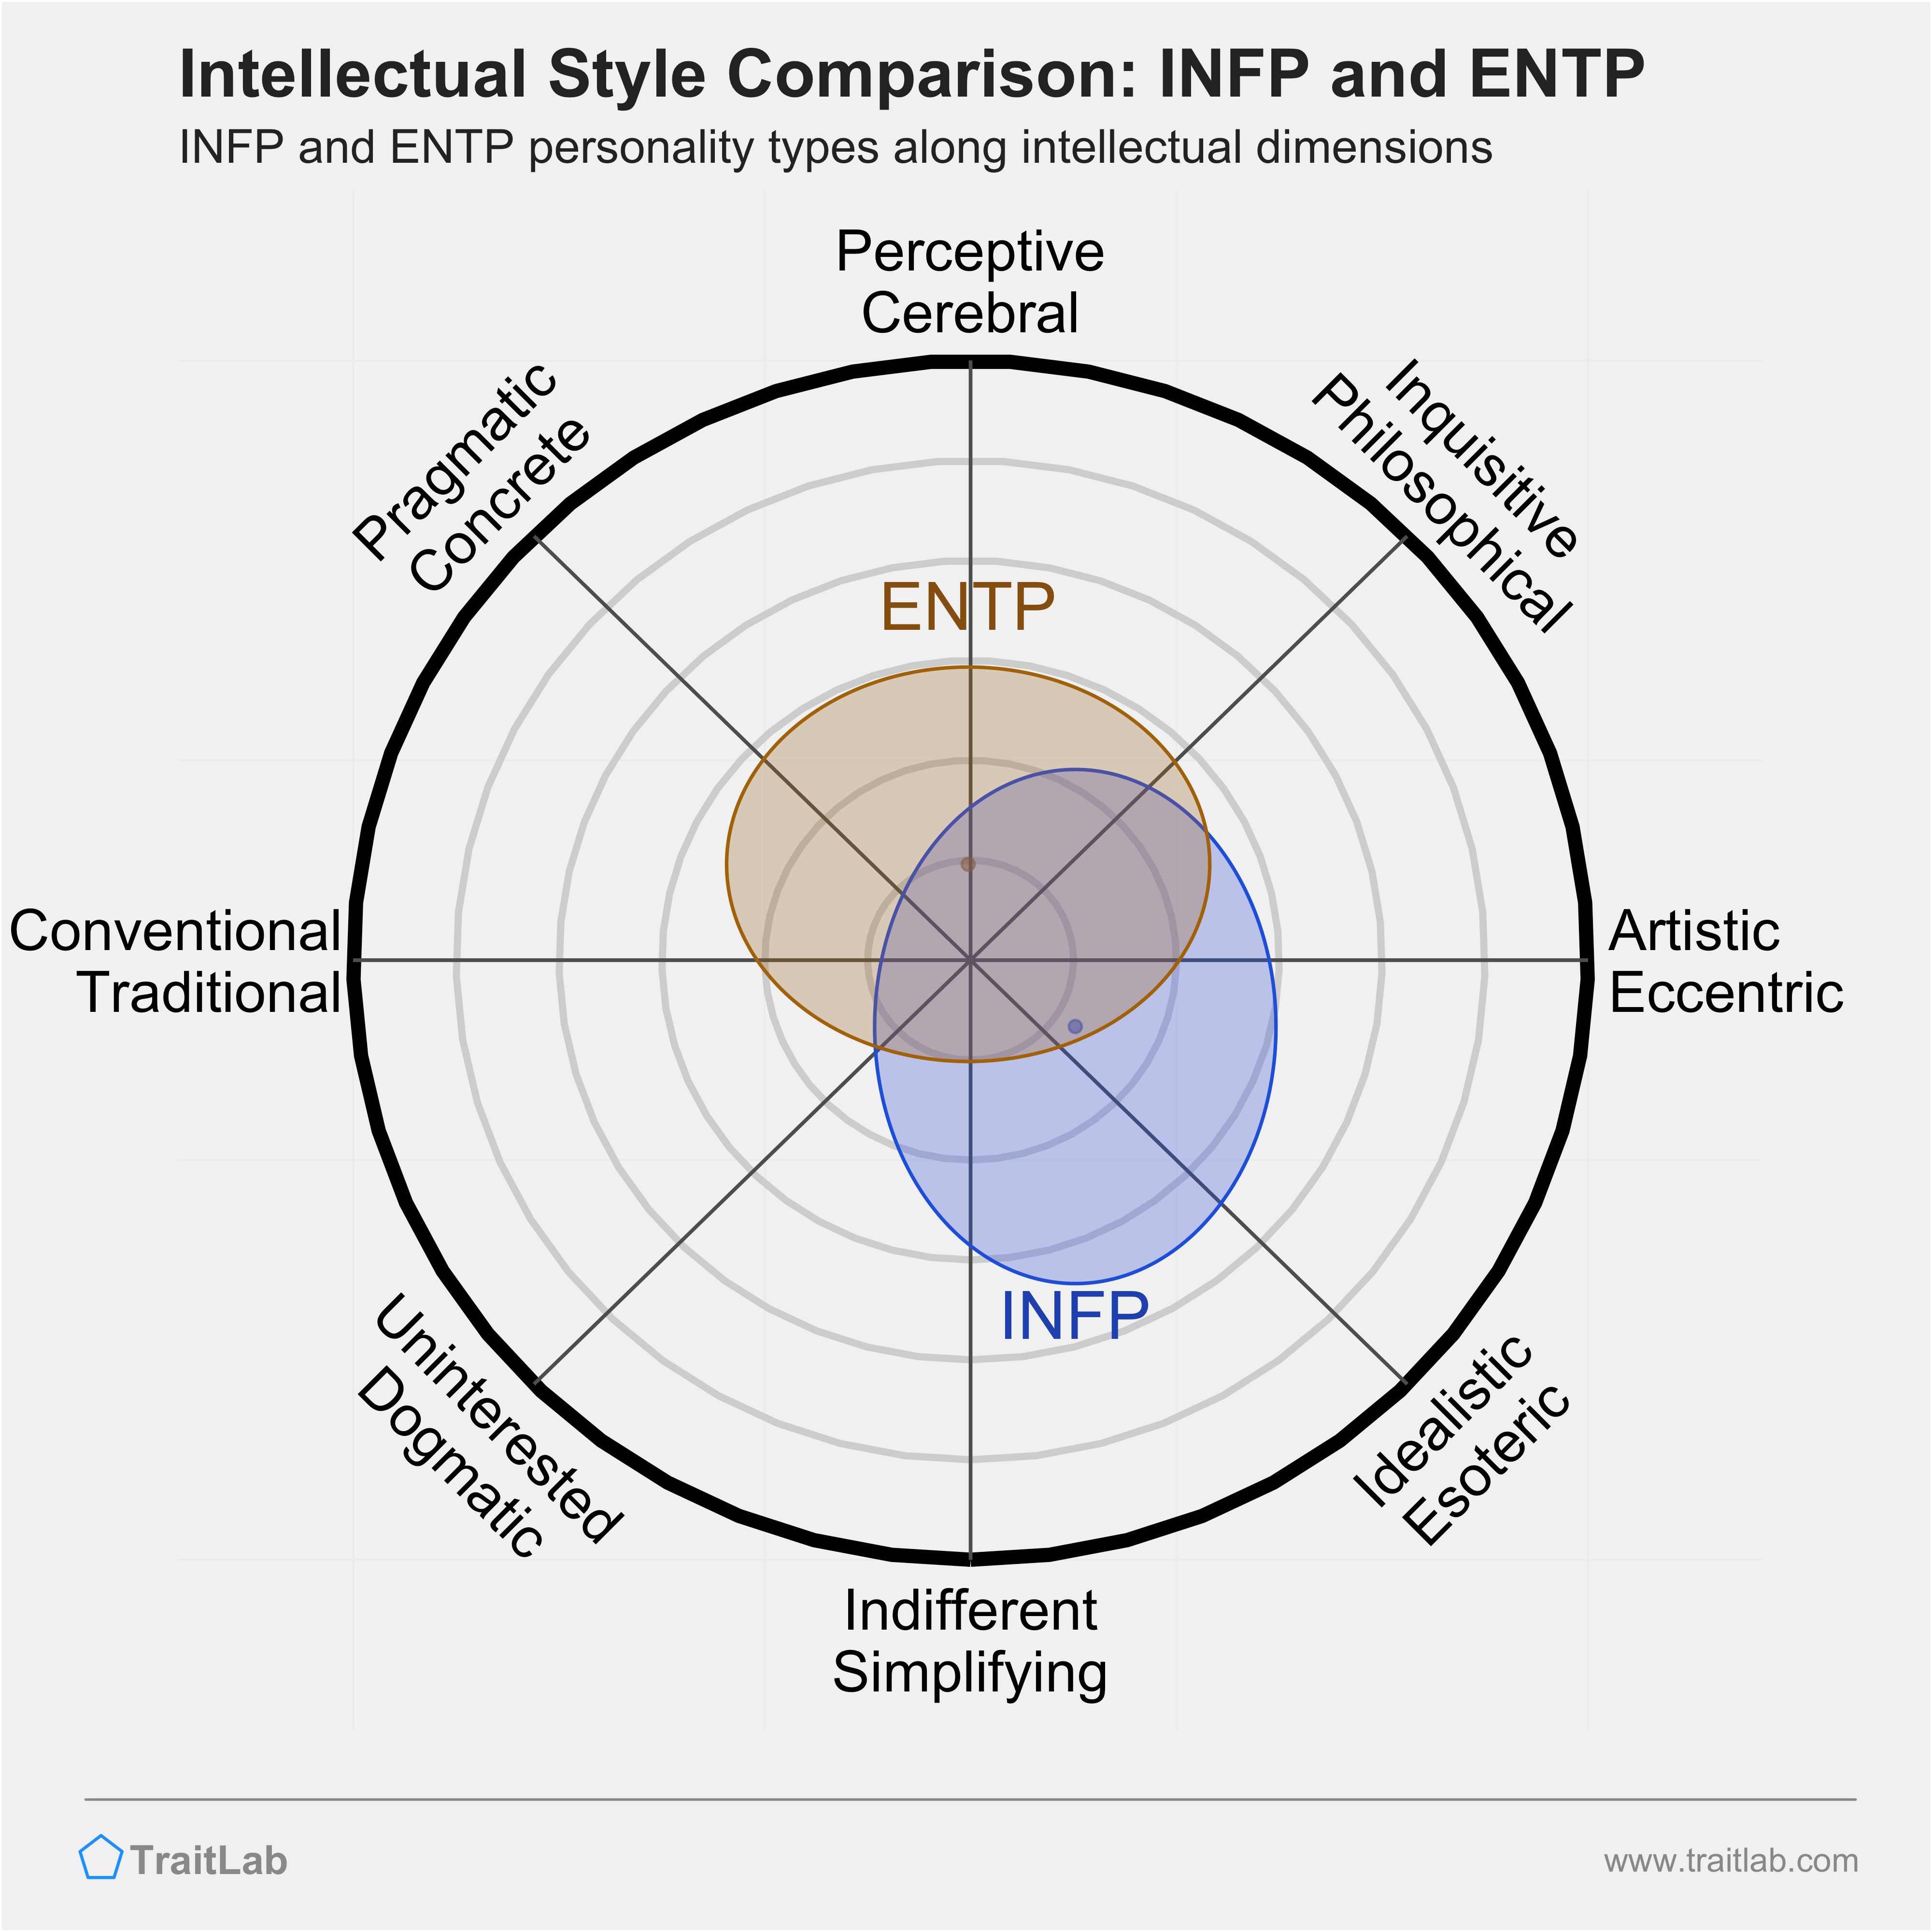 INFP and ENTP comparison across intellectual dimensions